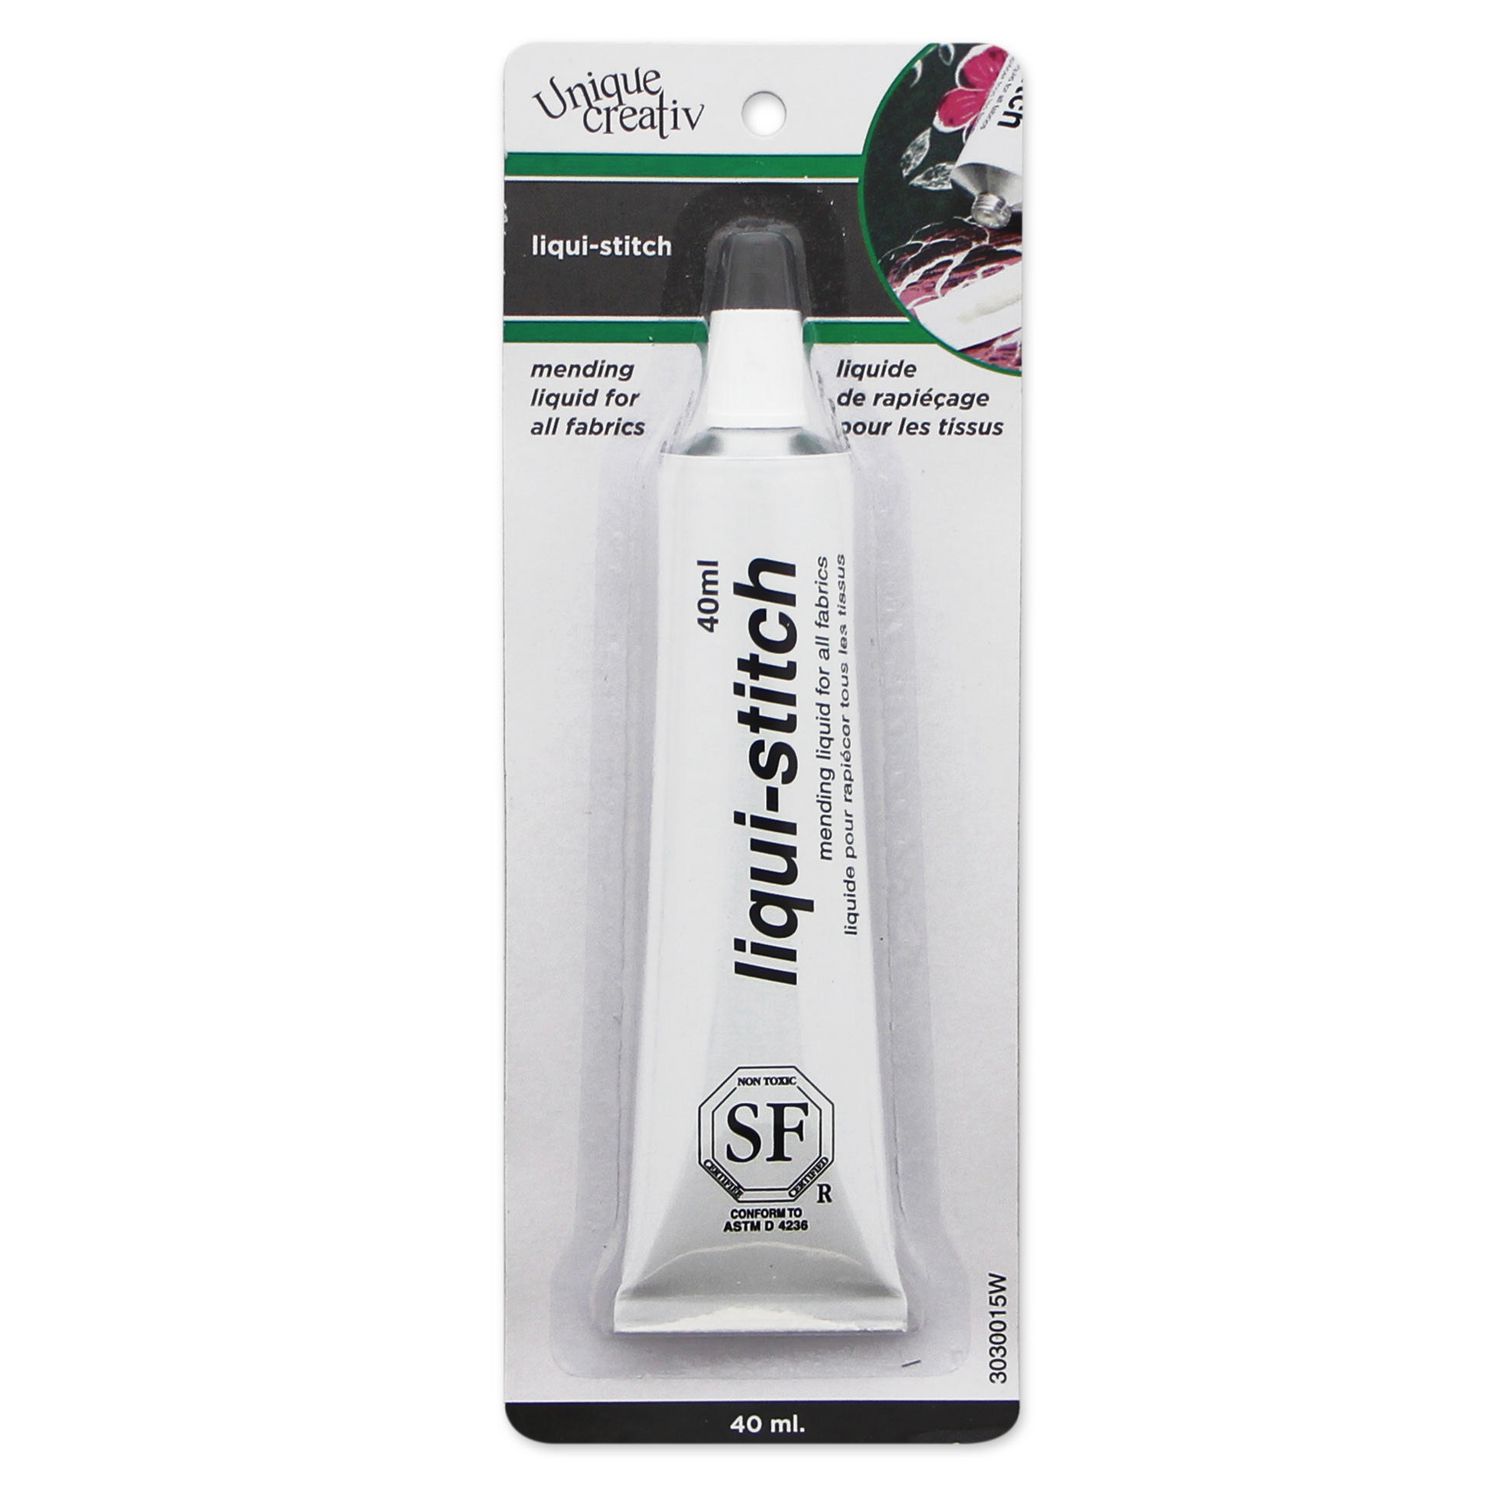 Fabric Fusion Pen (0.63fl oz.), Aleene's : Sewing Parts Online